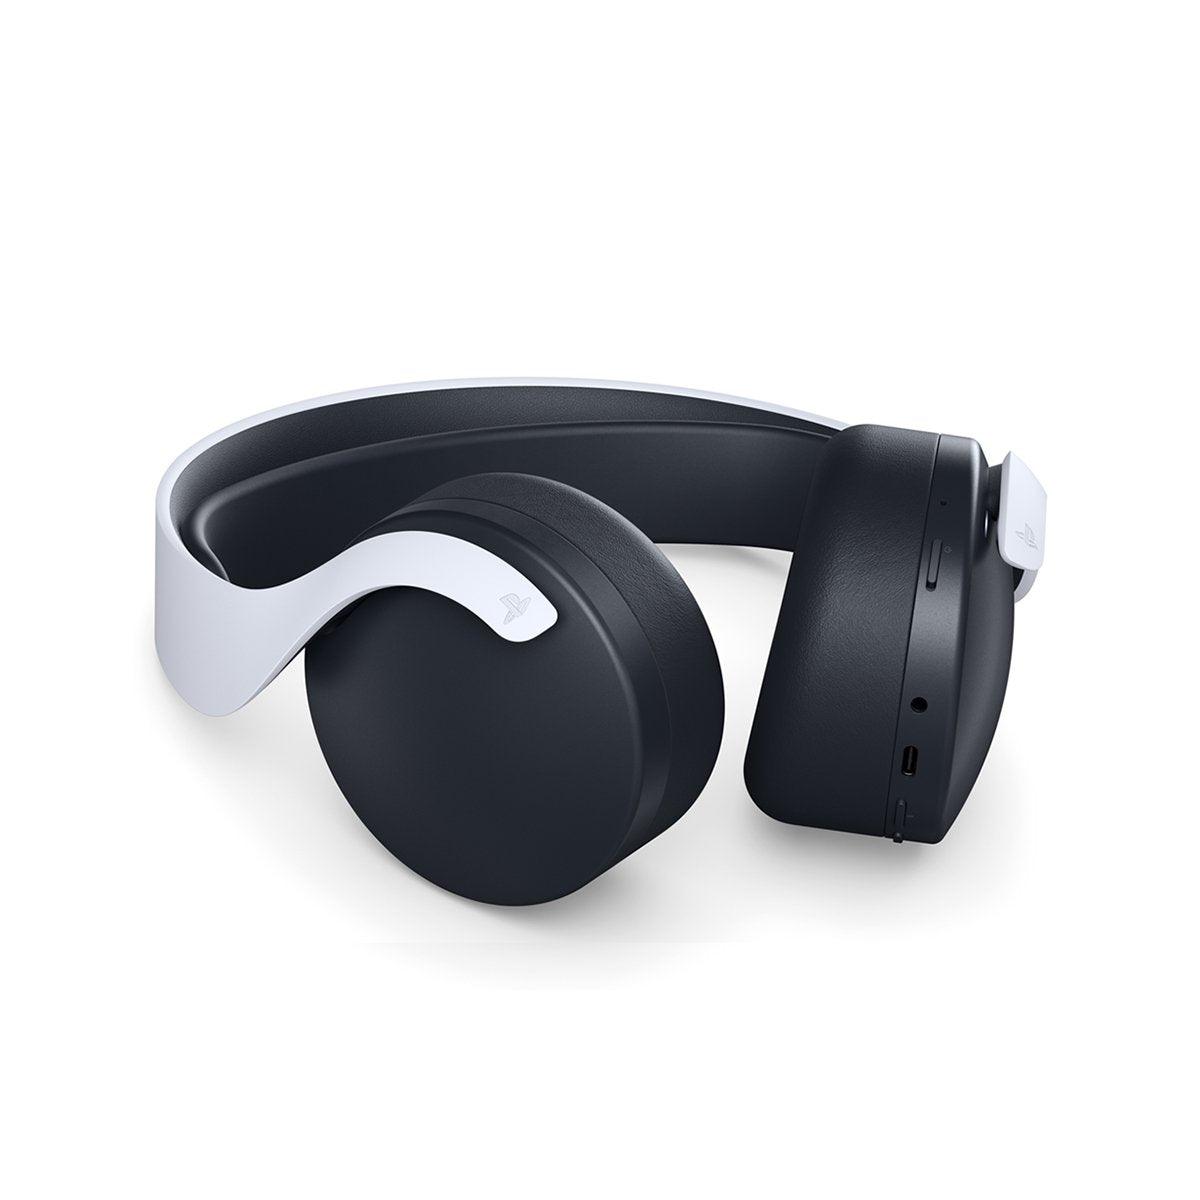 pulse 3d wireless headset for ps4